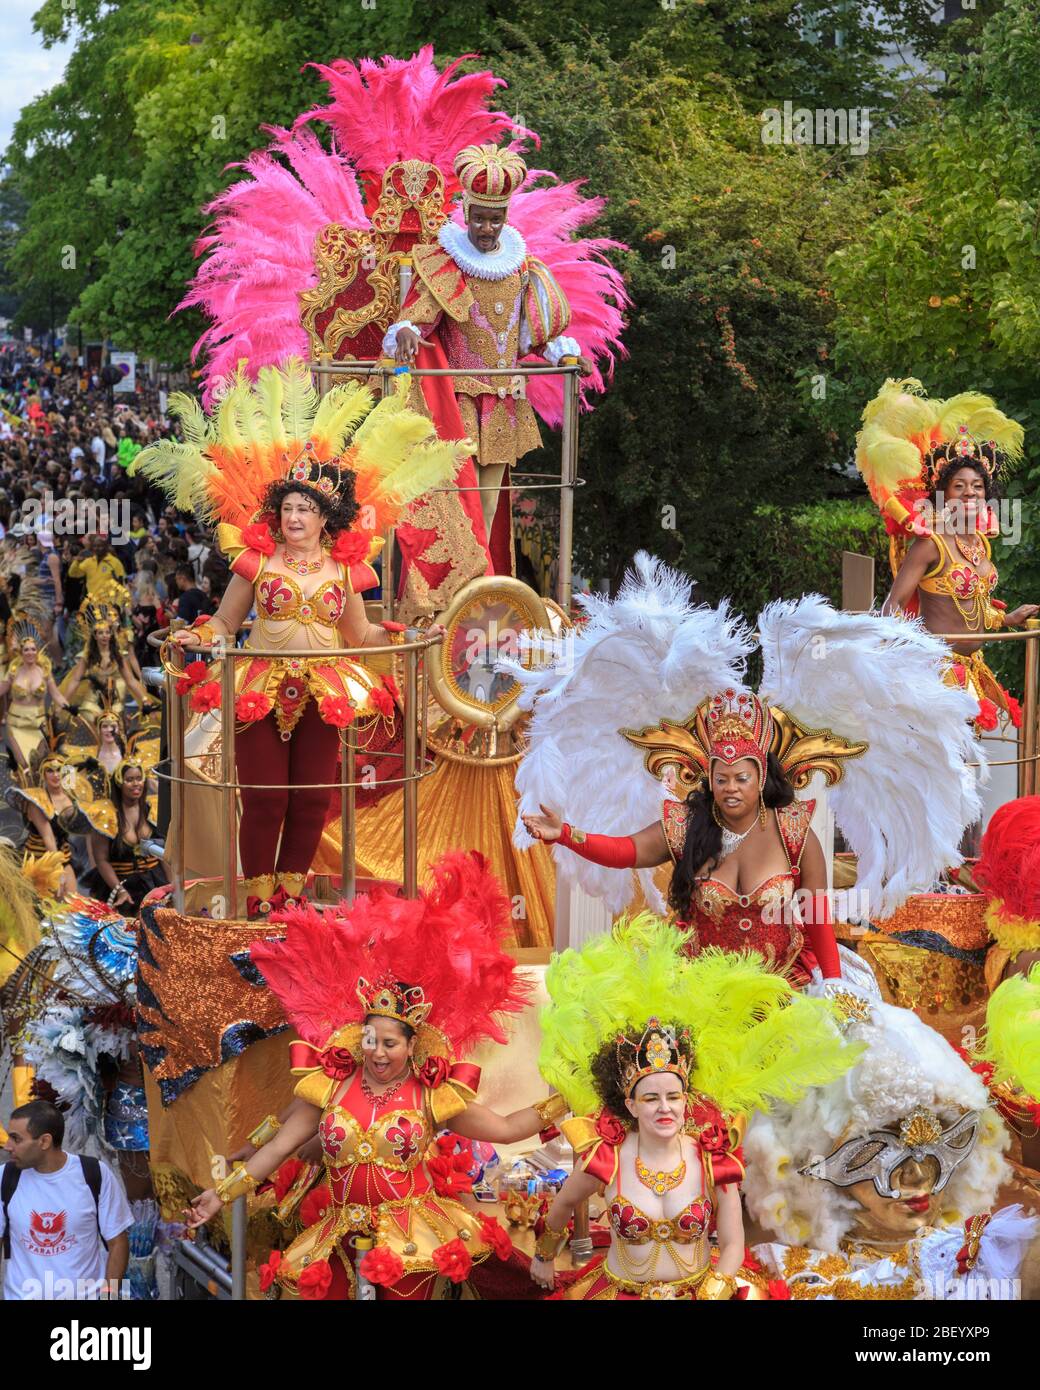 Colourful Caribbean float and participants in costume at Notting Hill carnival street festival and parade, London, UK Stock Photo